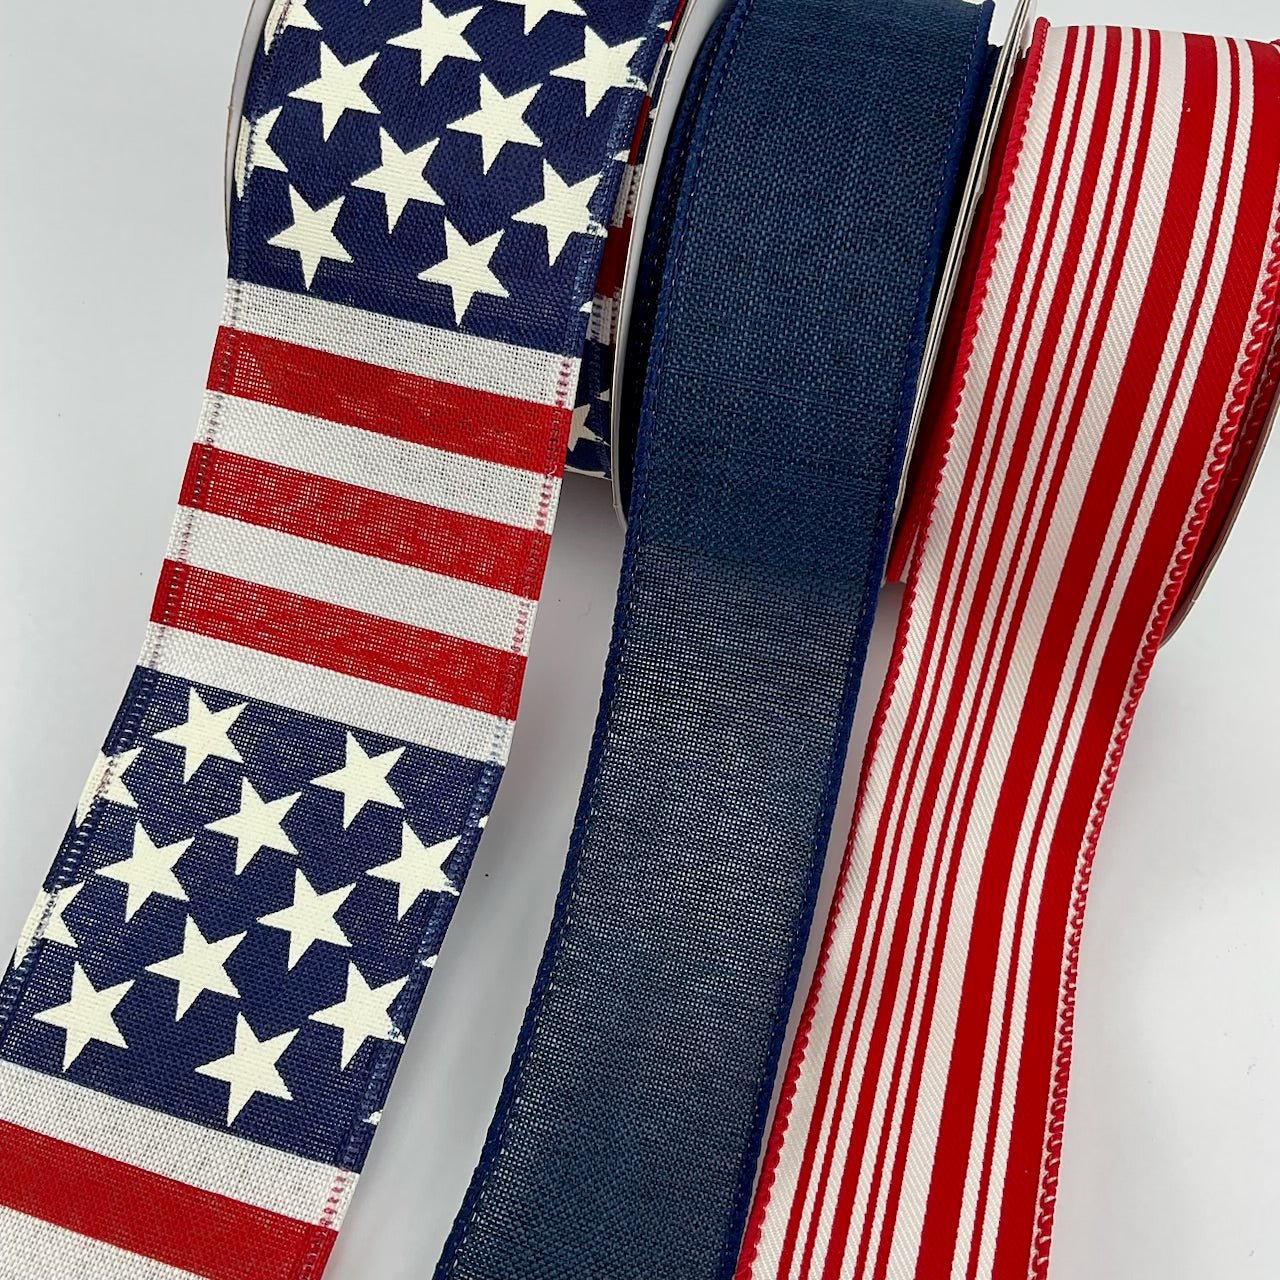 Red and navy Patriotic bow bundle x 3 ribbons - Greenery MarketWired ribbon